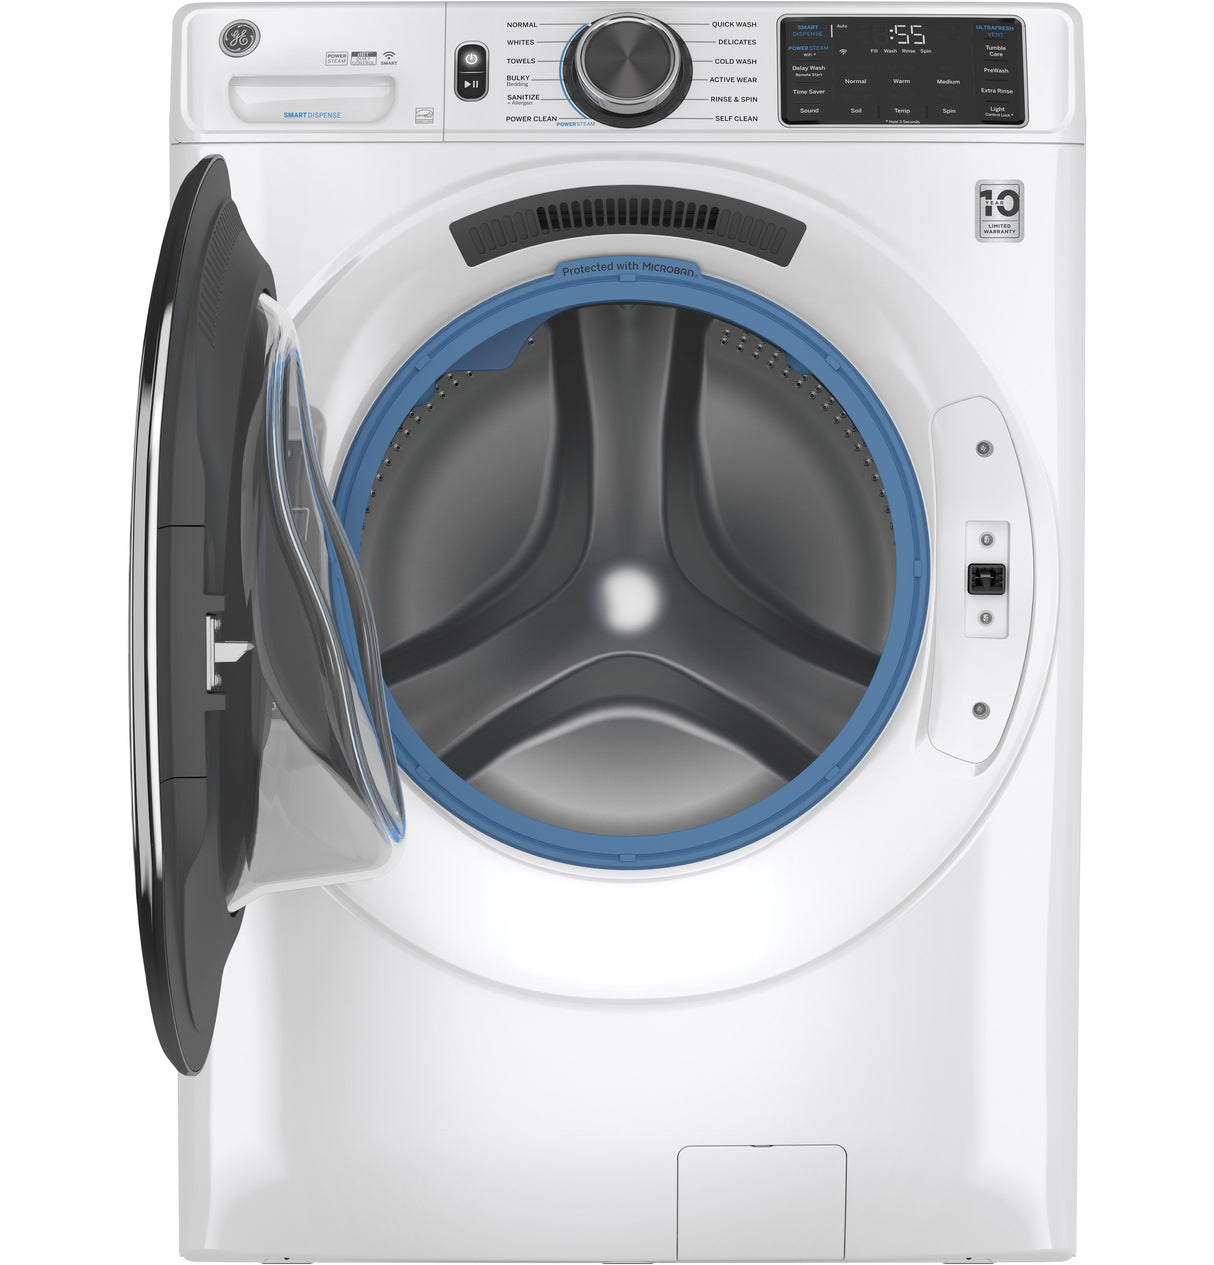 GE(R) ENERGY STAR(R) 4.8 cu. ft. Capacity Smart Front Load Steam Washer with SmartDispense(TM) UltraFresh Vent System with OdorBlock(TM) and Sanitize + Allergen - (GFW650SSNWW)